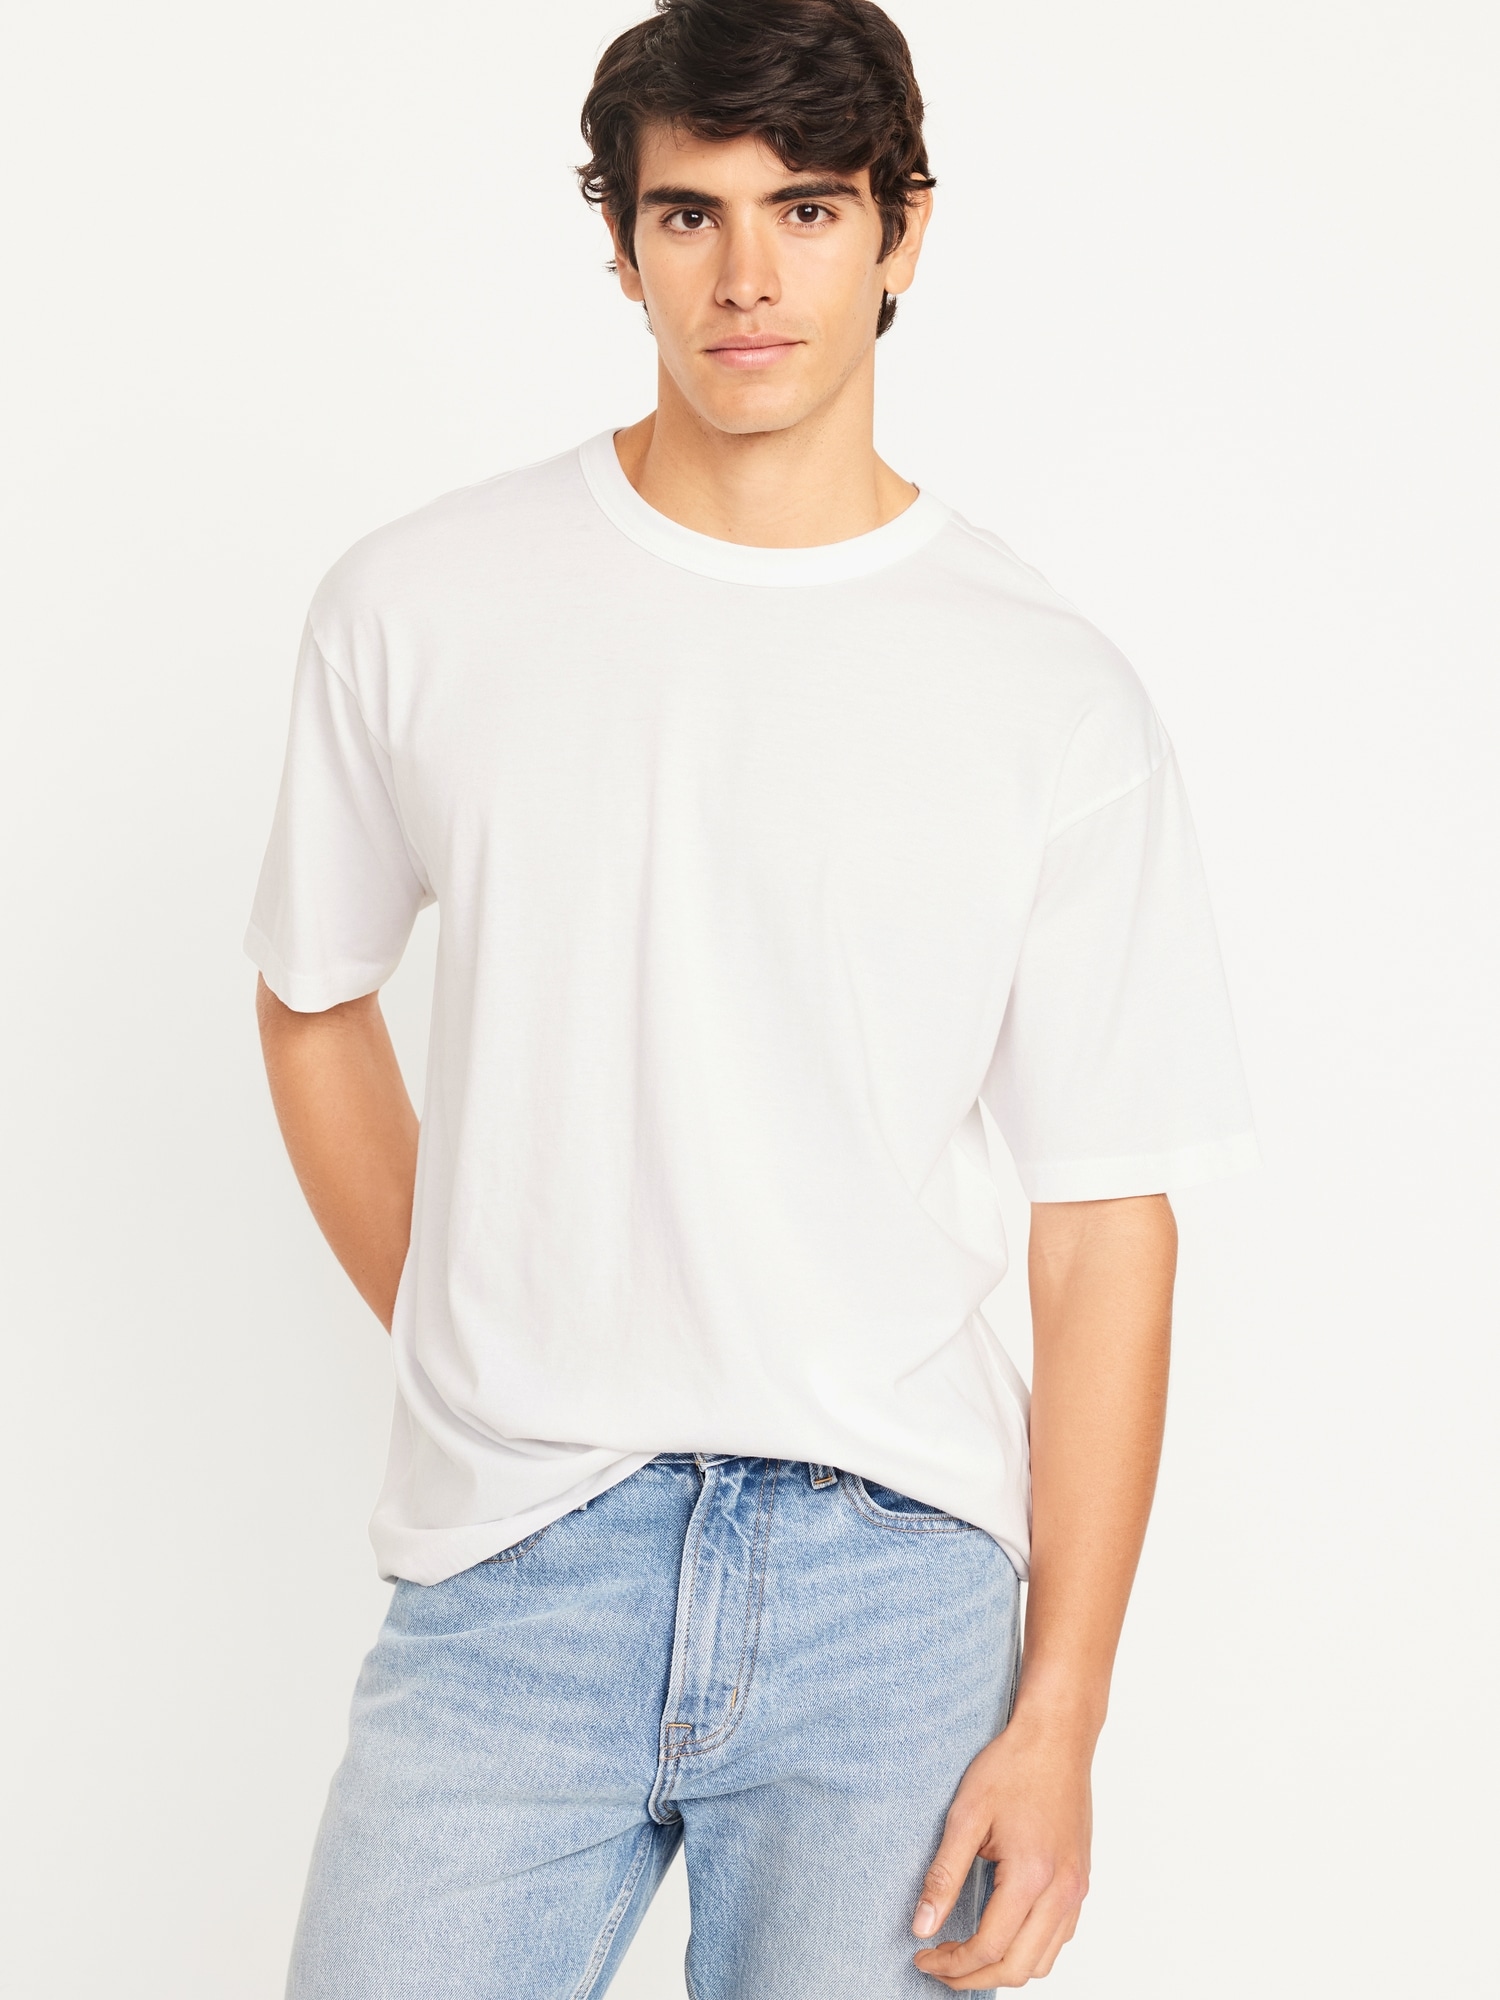 Loose Fit Crew-Neck T-Shirt